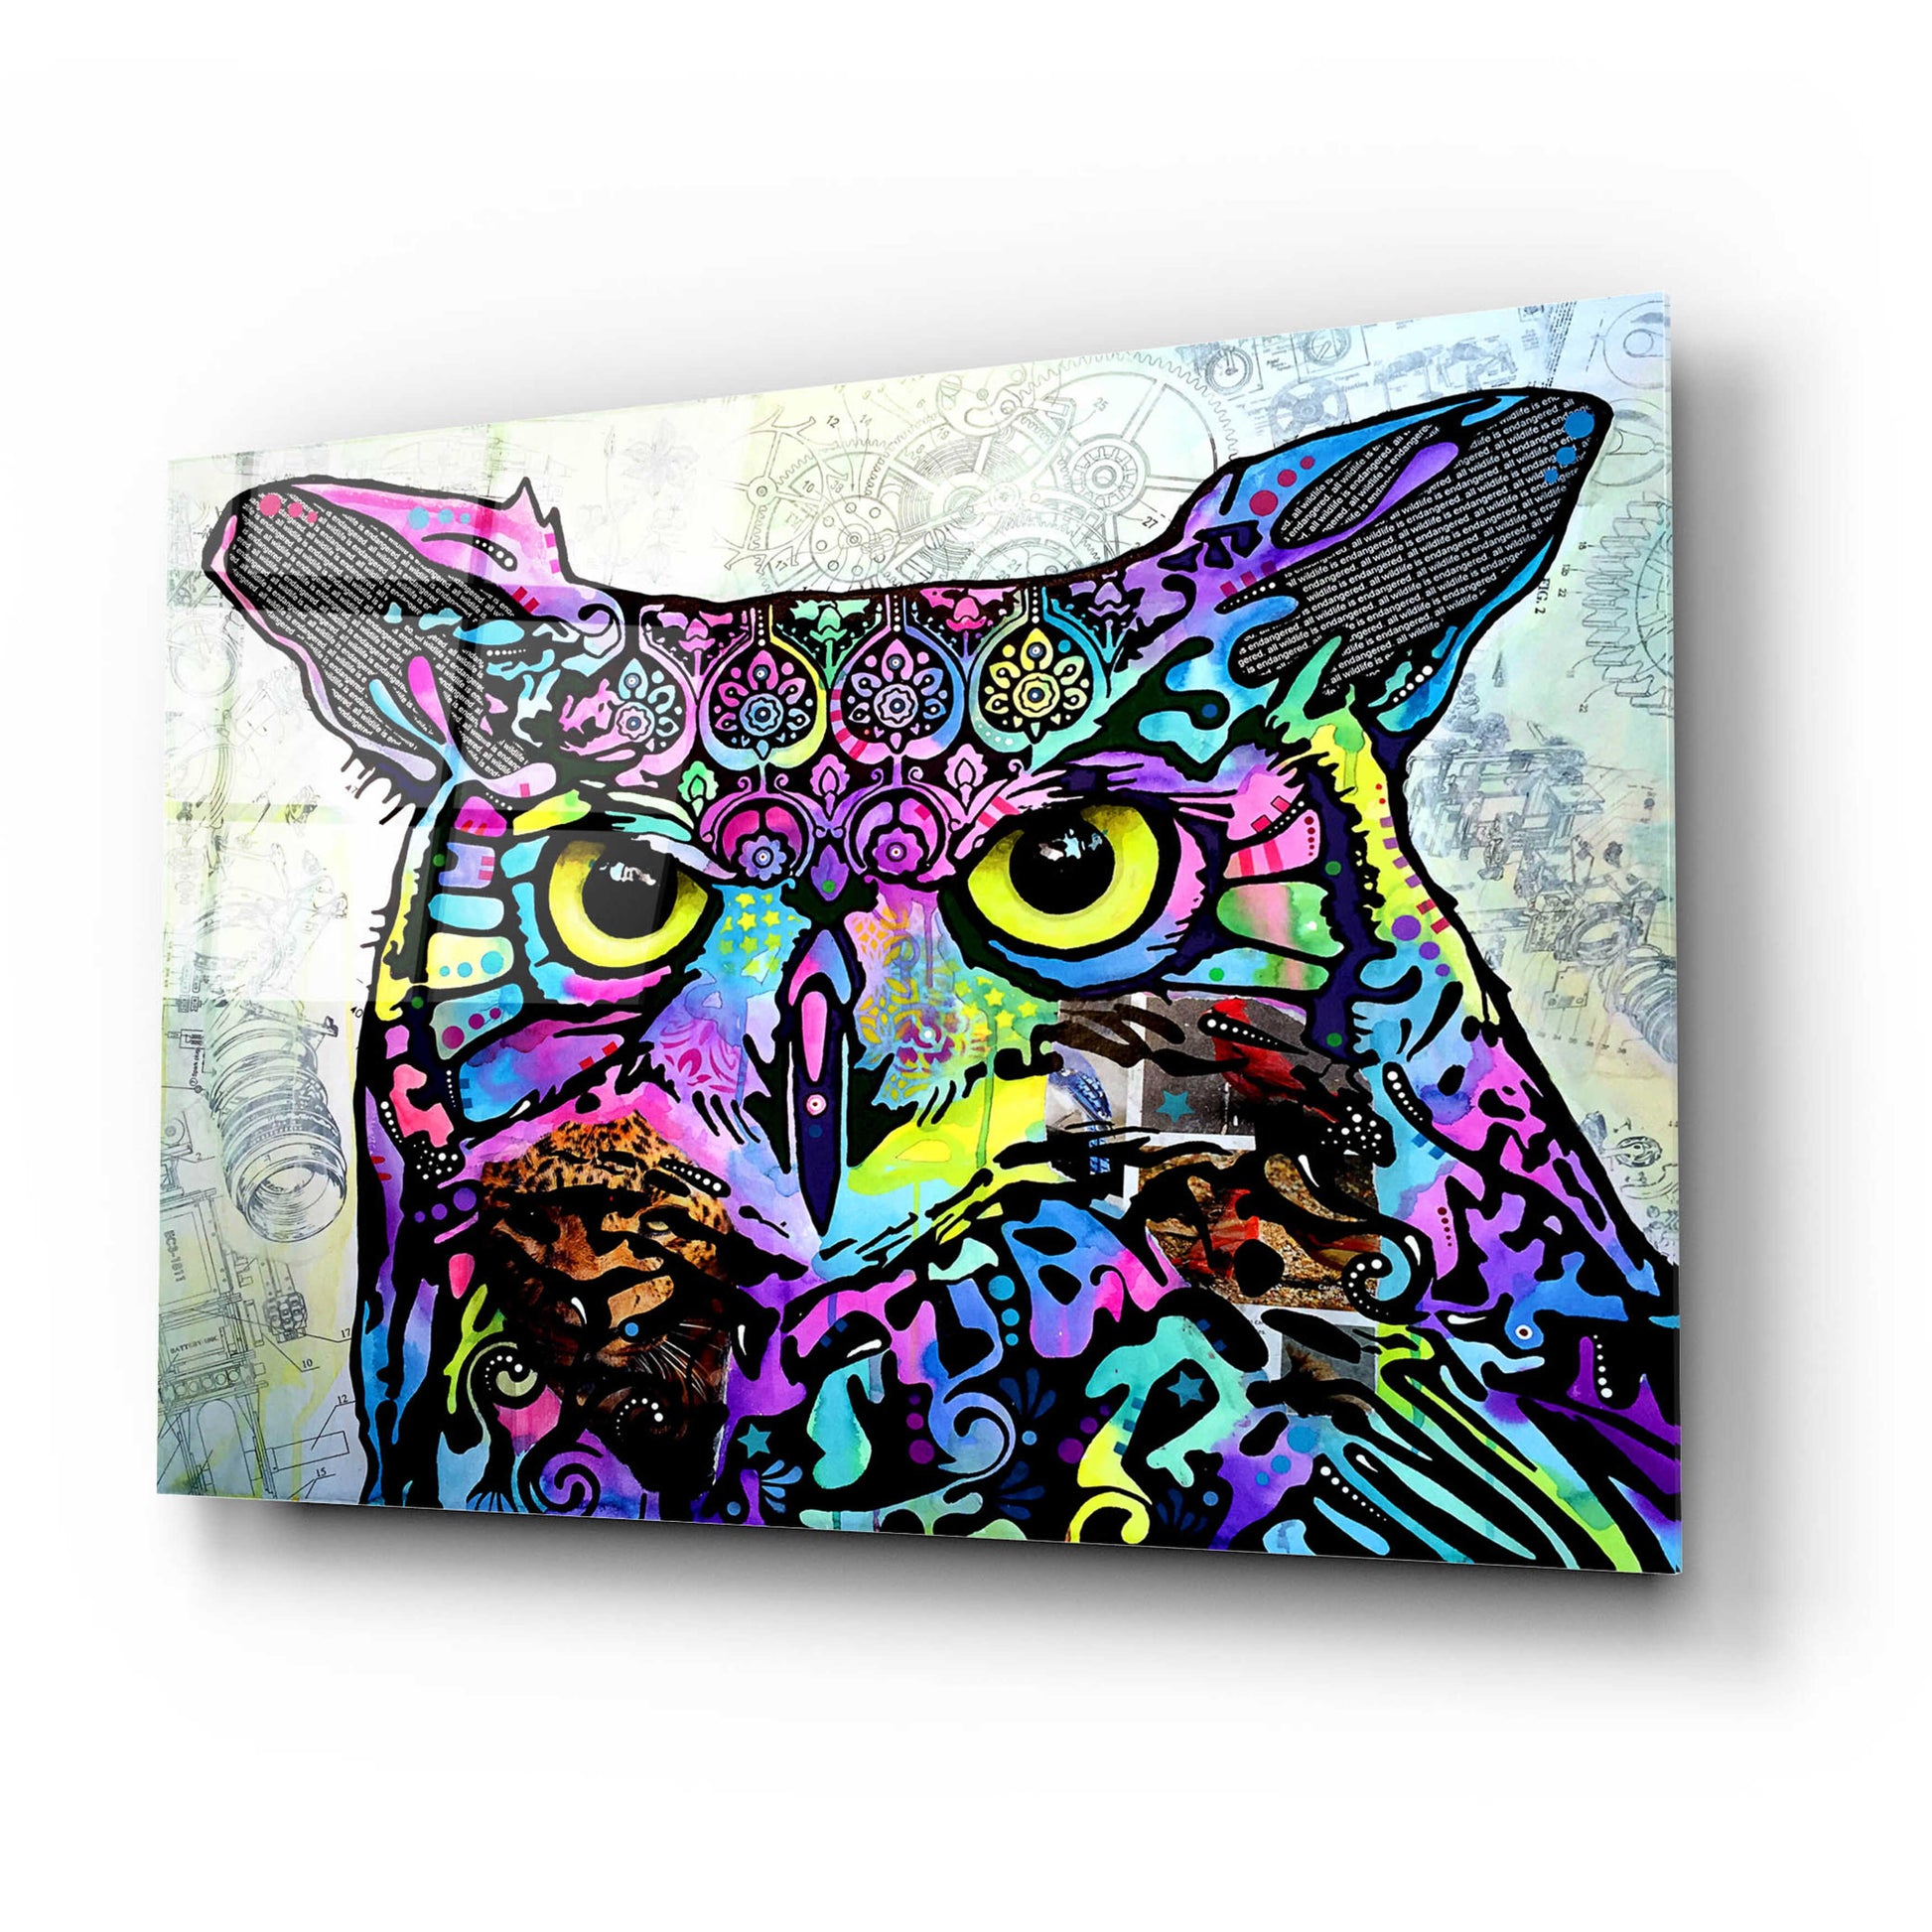 Epic Art 'The Owl' by Dean Russo, Acrylic Glass Wall Art,24x16